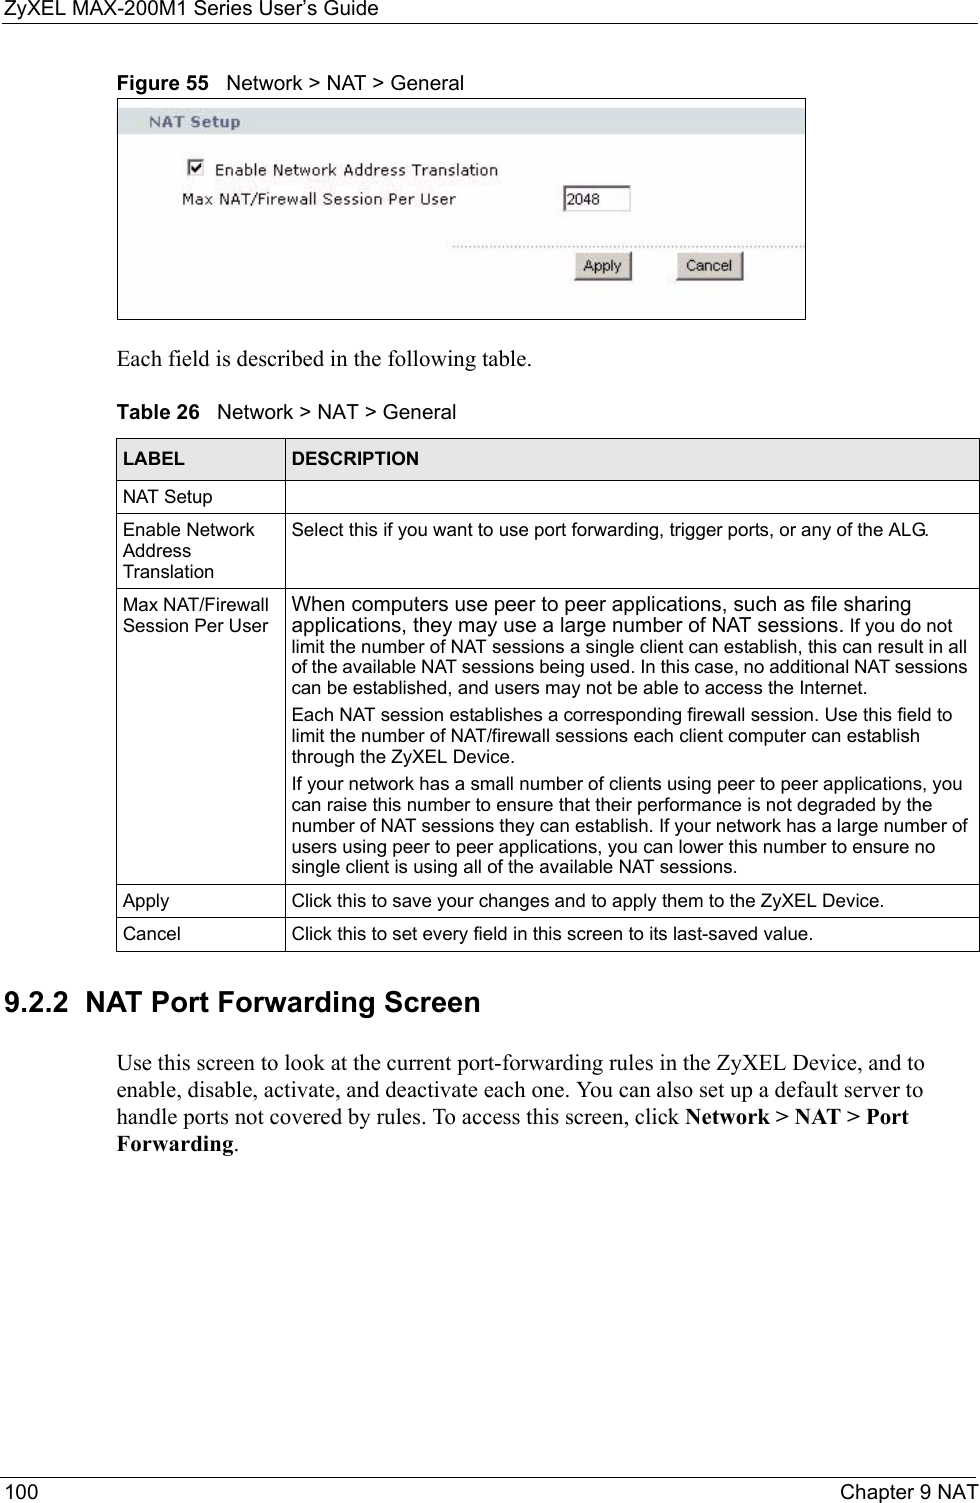 ZyXEL MAX-200M1 Series User’s Guide100 Chapter 9 NATFigure 55   Network &gt; NAT &gt; GeneralEach field is described in the following table.9.2.2  NAT Port Forwarding ScreenUse this screen to look at the current port-forwarding rules in the ZyXEL Device, and to enable, disable, activate, and deactivate each one. You can also set up a default server to handle ports not covered by rules. To access this screen, click Network &gt; NAT &gt; Port Forwarding.Table 26   Network &gt; NAT &gt; GeneralLABEL DESCRIPTIONNAT SetupEnable Network Address TranslationSelect this if you want to use port forwarding, trigger ports, or any of the ALG.Max NAT/Firewall Session Per UserWhen computers use peer to peer applications, such as file sharing applications, they may use a large number of NAT sessions. If you do not limit the number of NAT sessions a single client can establish, this can result in all of the available NAT sessions being used. In this case, no additional NAT sessions can be established, and users may not be able to access the Internet.  Each NAT session establishes a corresponding firewall session. Use this field to limit the number of NAT/firewall sessions each client computer can establish through the ZyXEL Device. If your network has a small number of clients using peer to peer applications, you can raise this number to ensure that their performance is not degraded by the number of NAT sessions they can establish. If your network has a large number of users using peer to peer applications, you can lower this number to ensure no single client is using all of the available NAT sessions.  Apply Click this to save your changes and to apply them to the ZyXEL Device.Cancel Click this to set every field in this screen to its last-saved value.